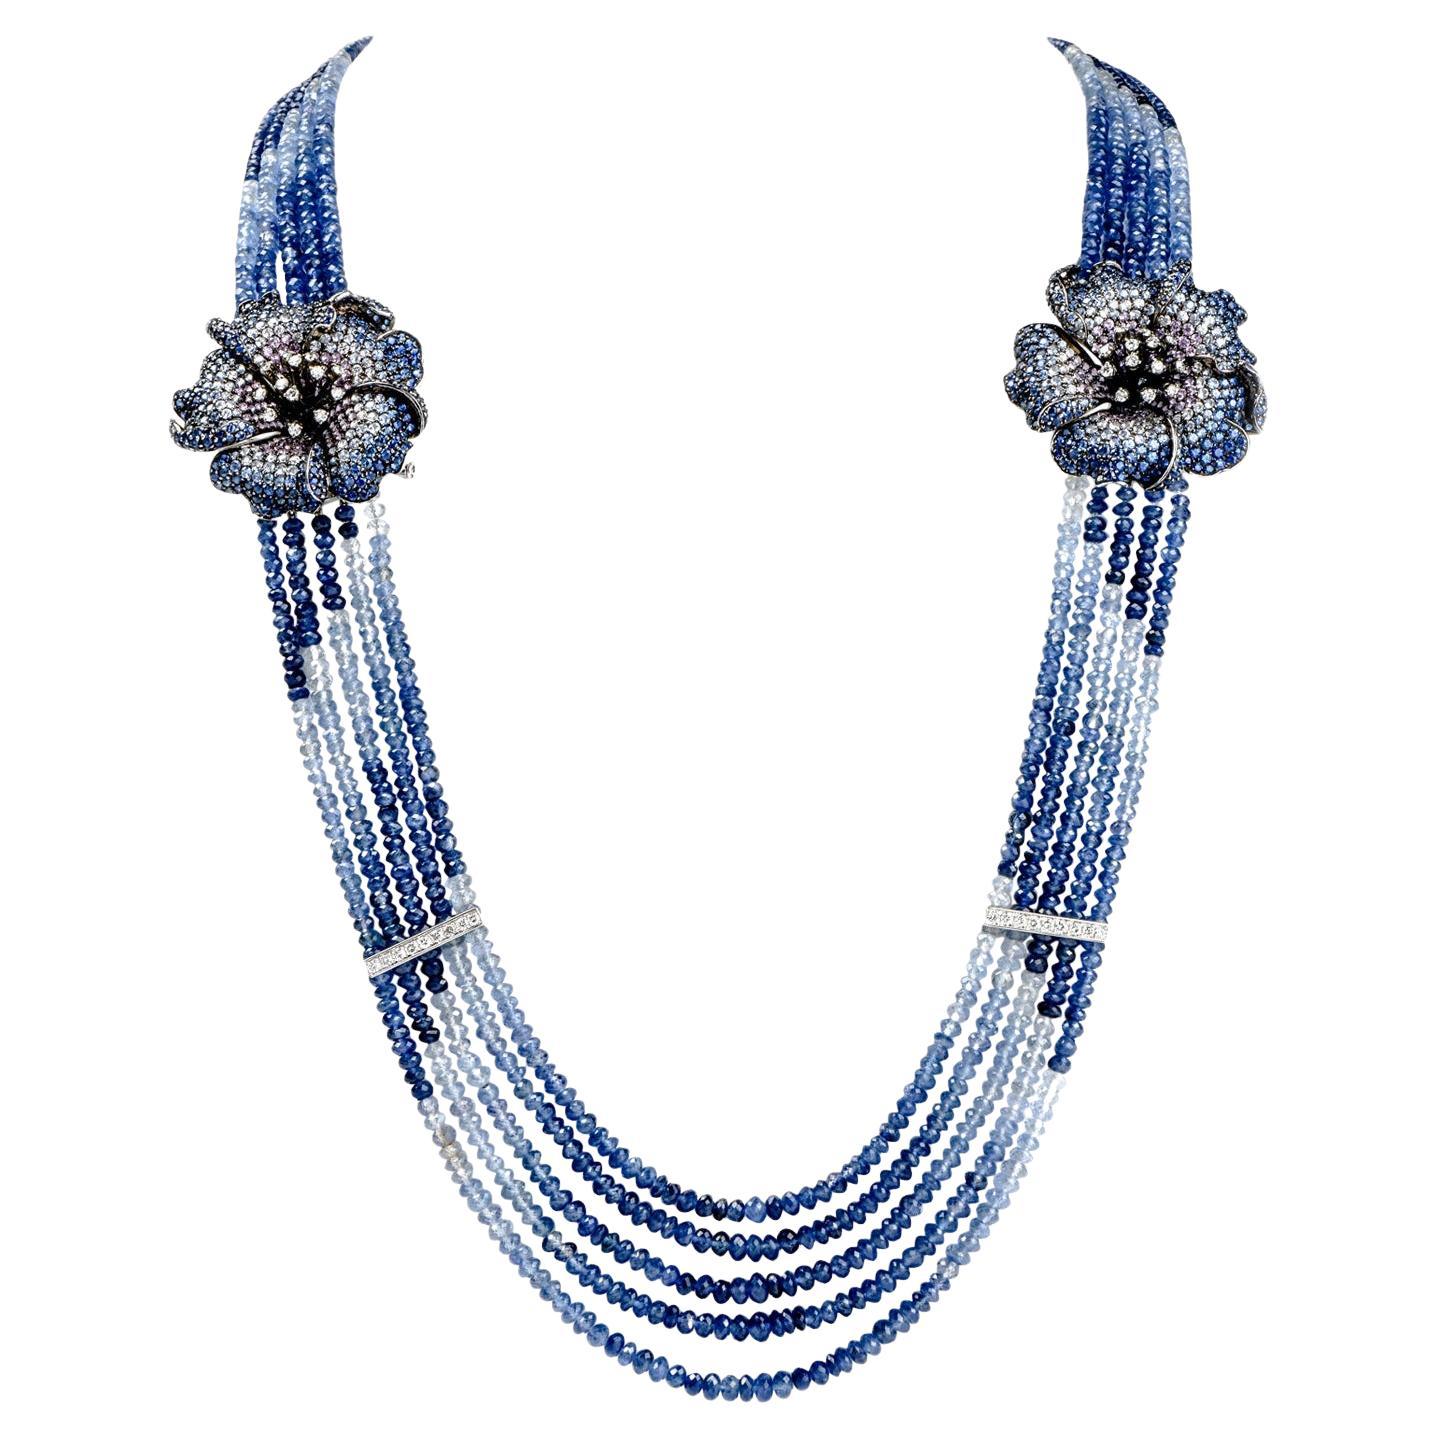  Diamond Sapphire Gold Multi-strand Bead Necklace and Double Flower Brooches